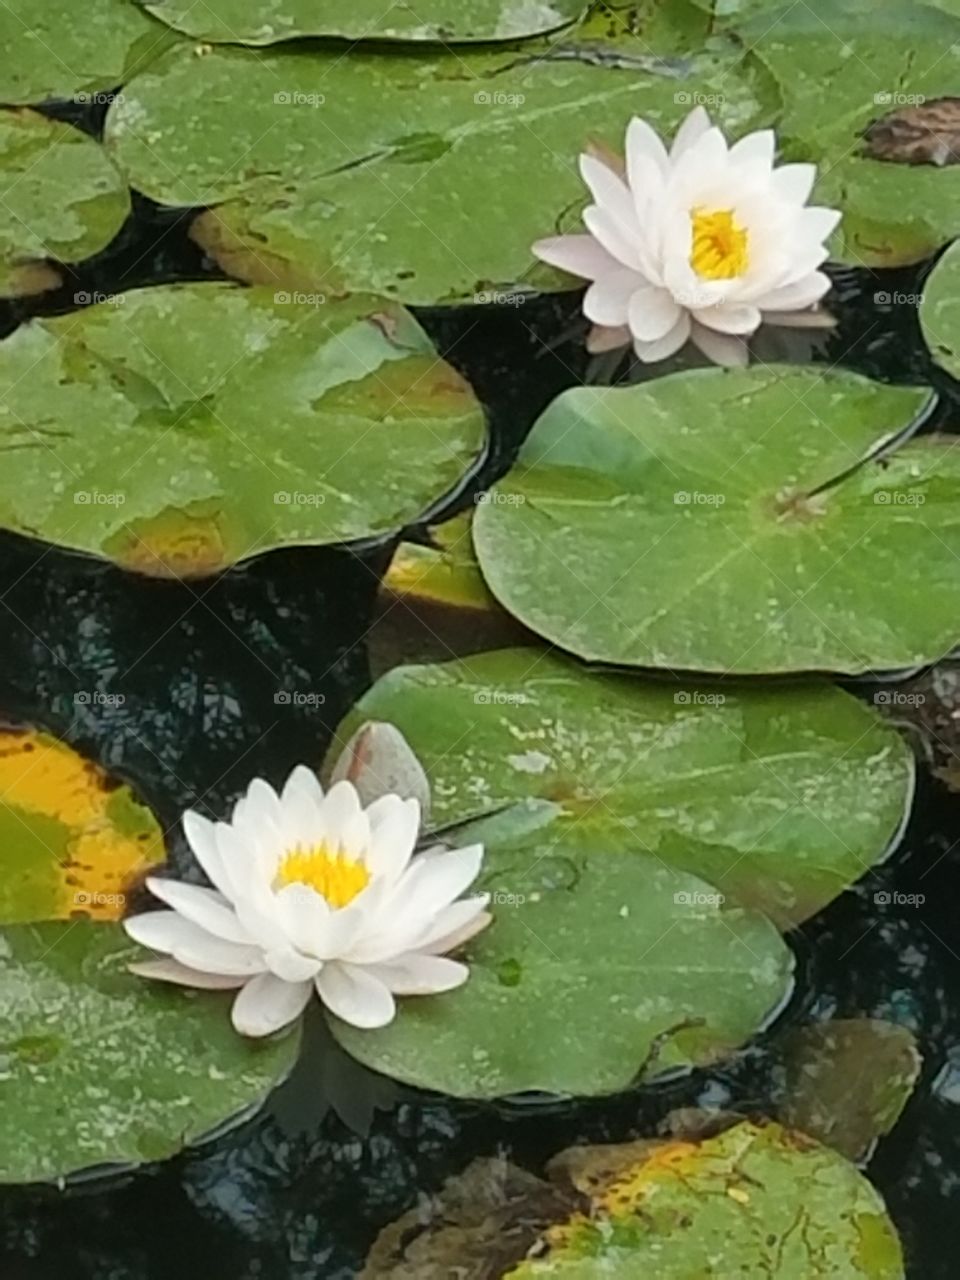 Lilly pads and fllwers